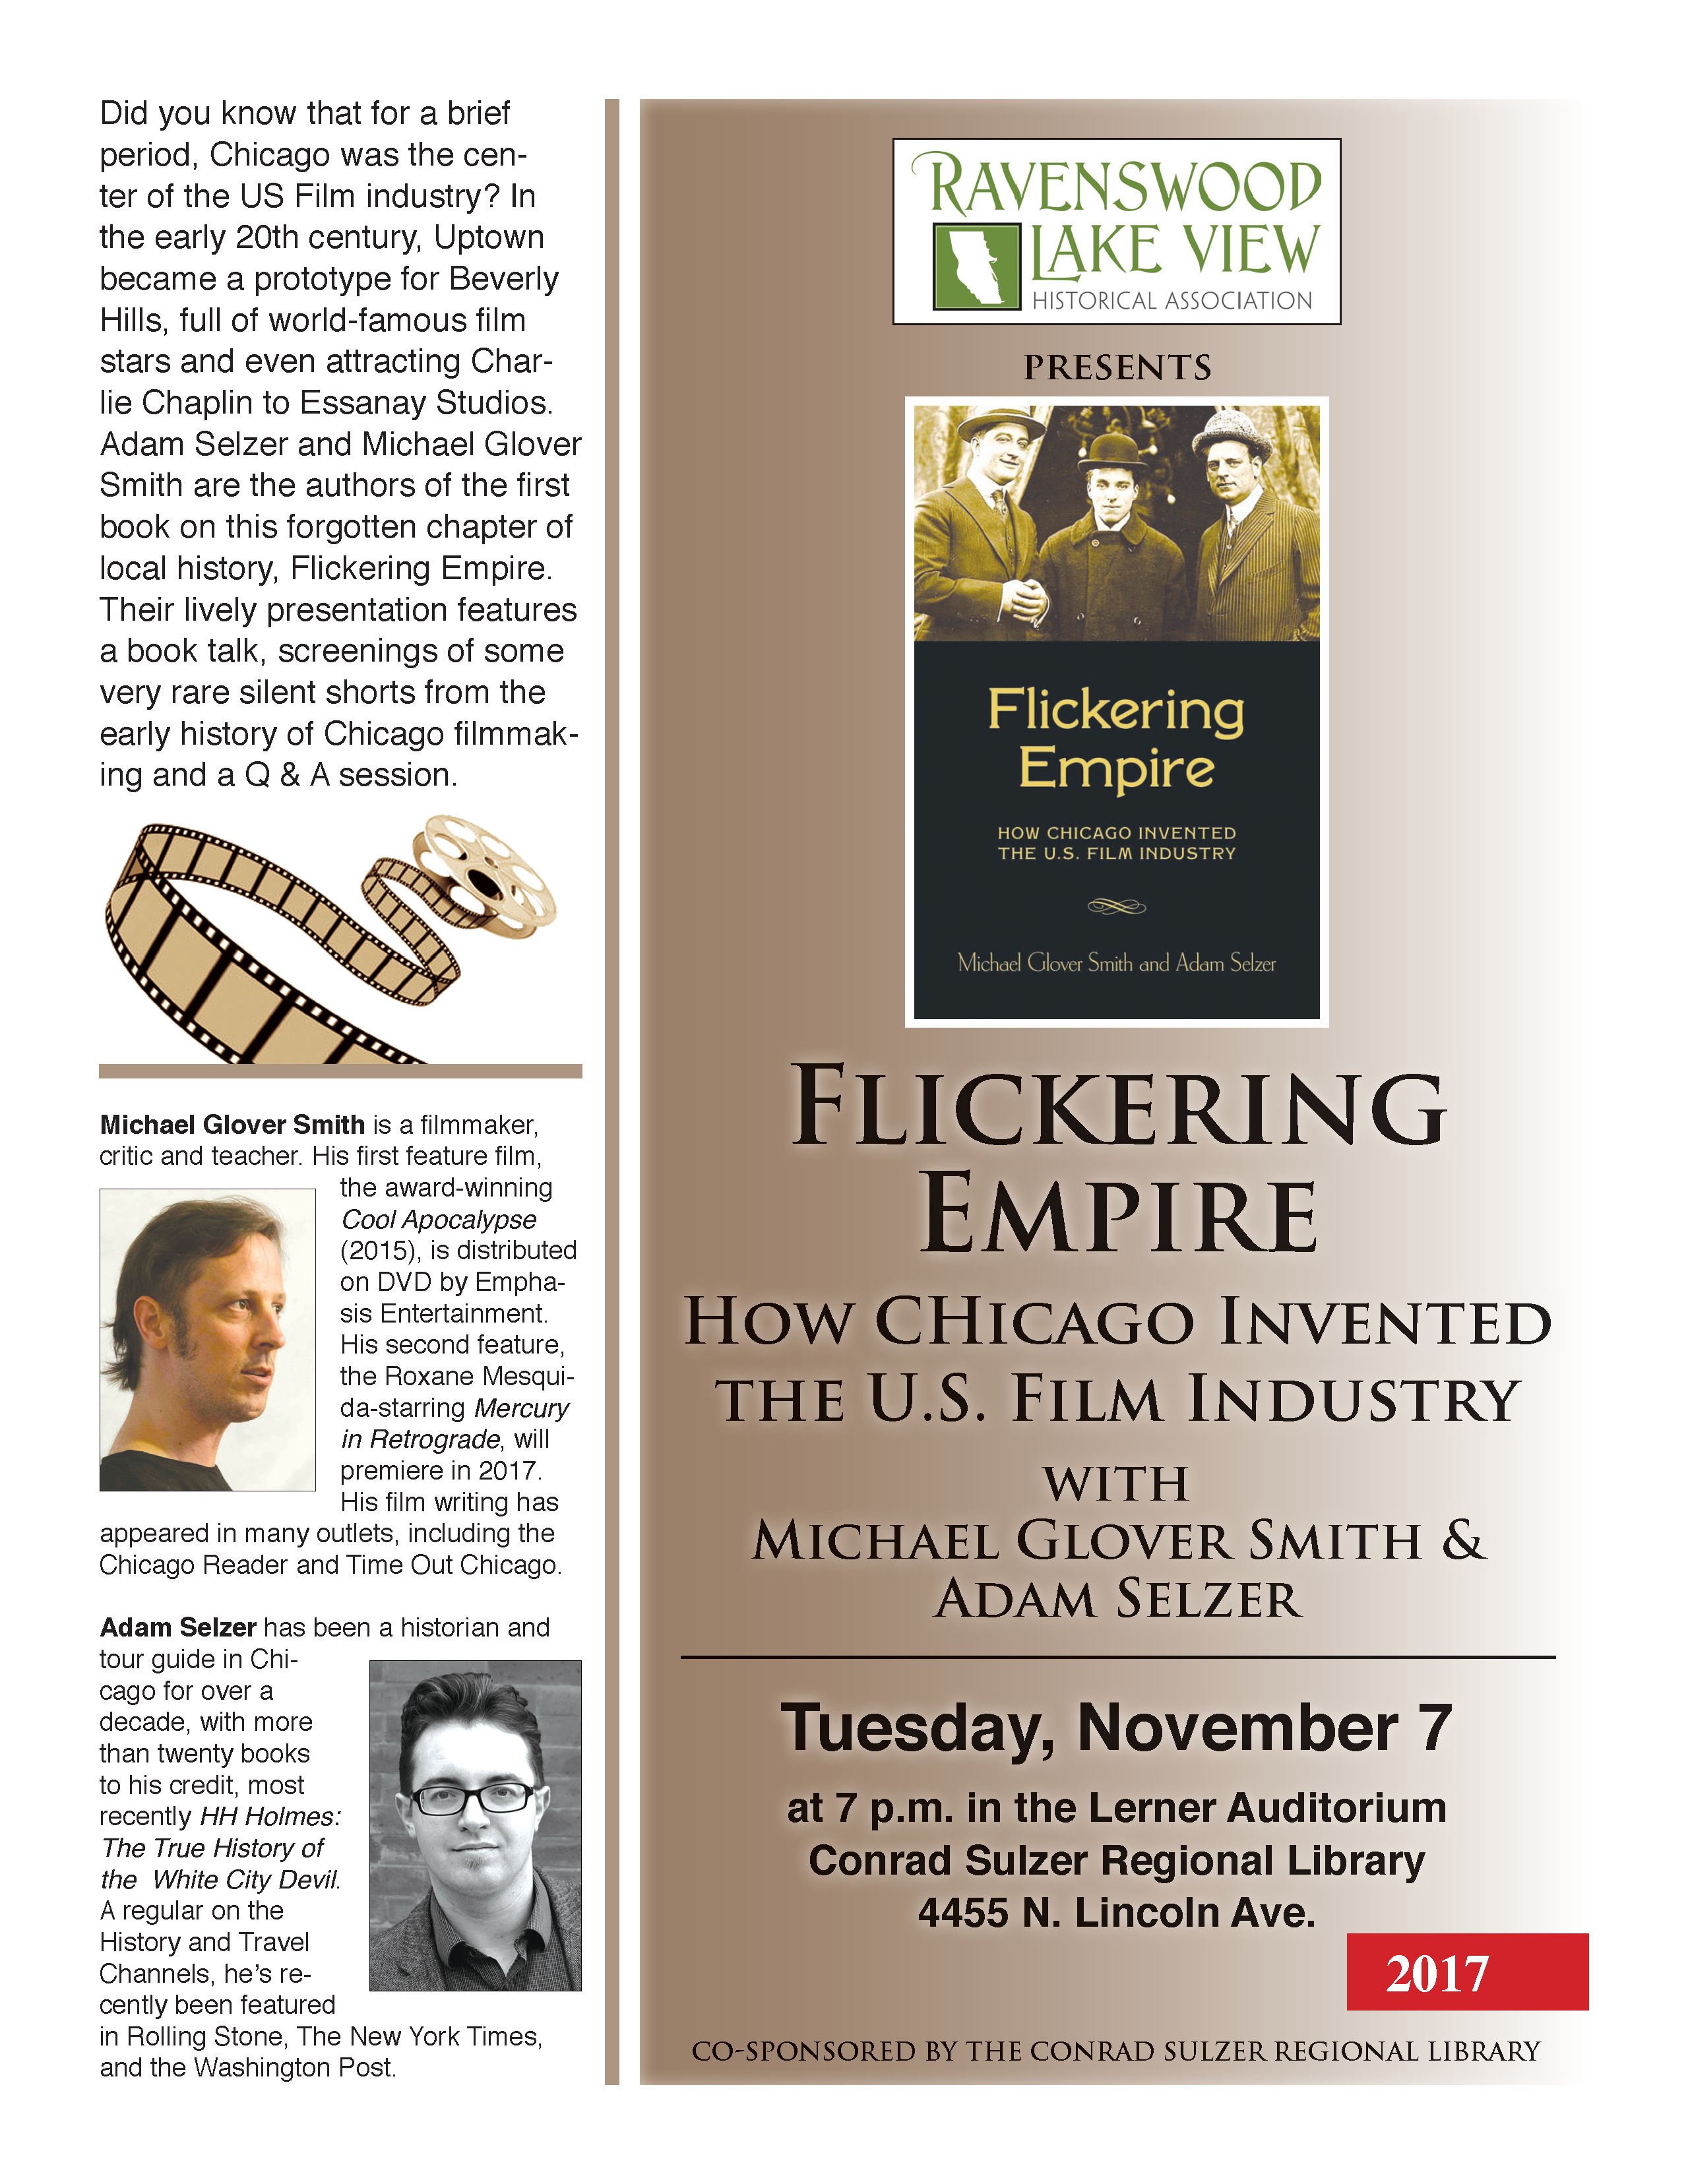 Flickering Empire: How Chicago Invented the U.S. Film Industry - November 7, 7pm - Conrad Sulzer Regional Library, 4455 N. Lincoln Ave.